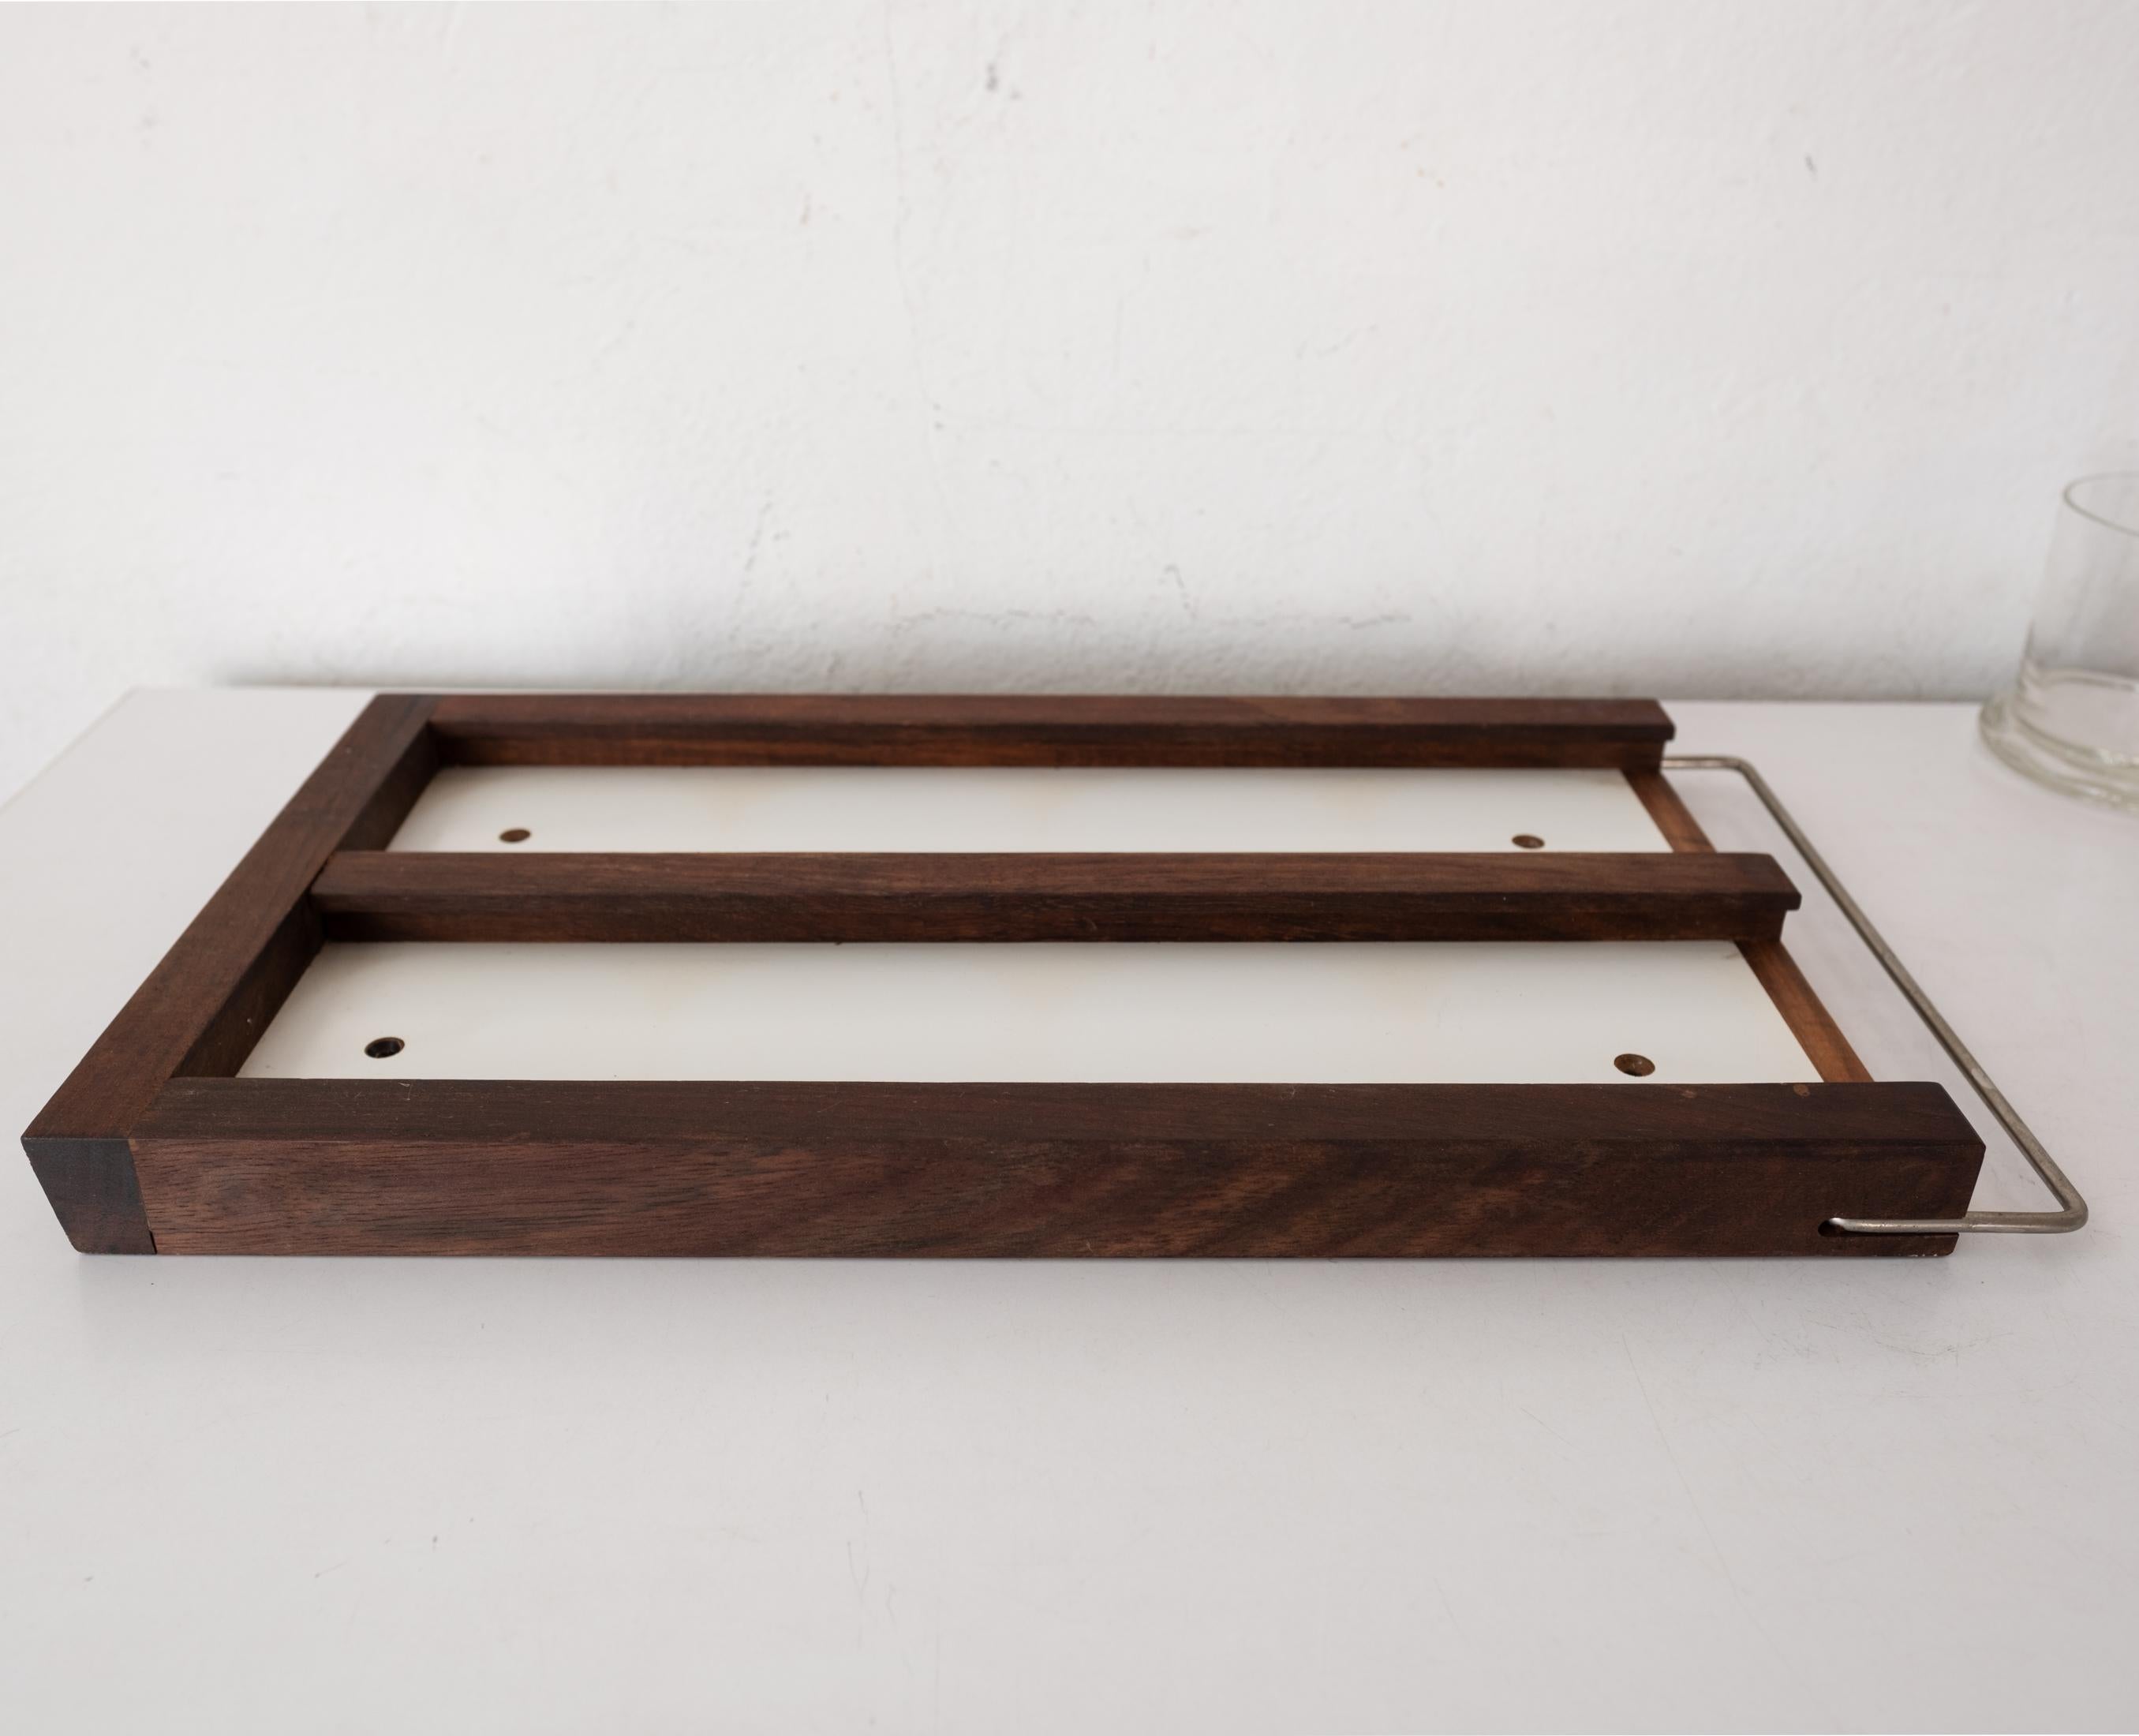 Walnut and Brass Wall Mounted Tray and Glasses For Sale 4